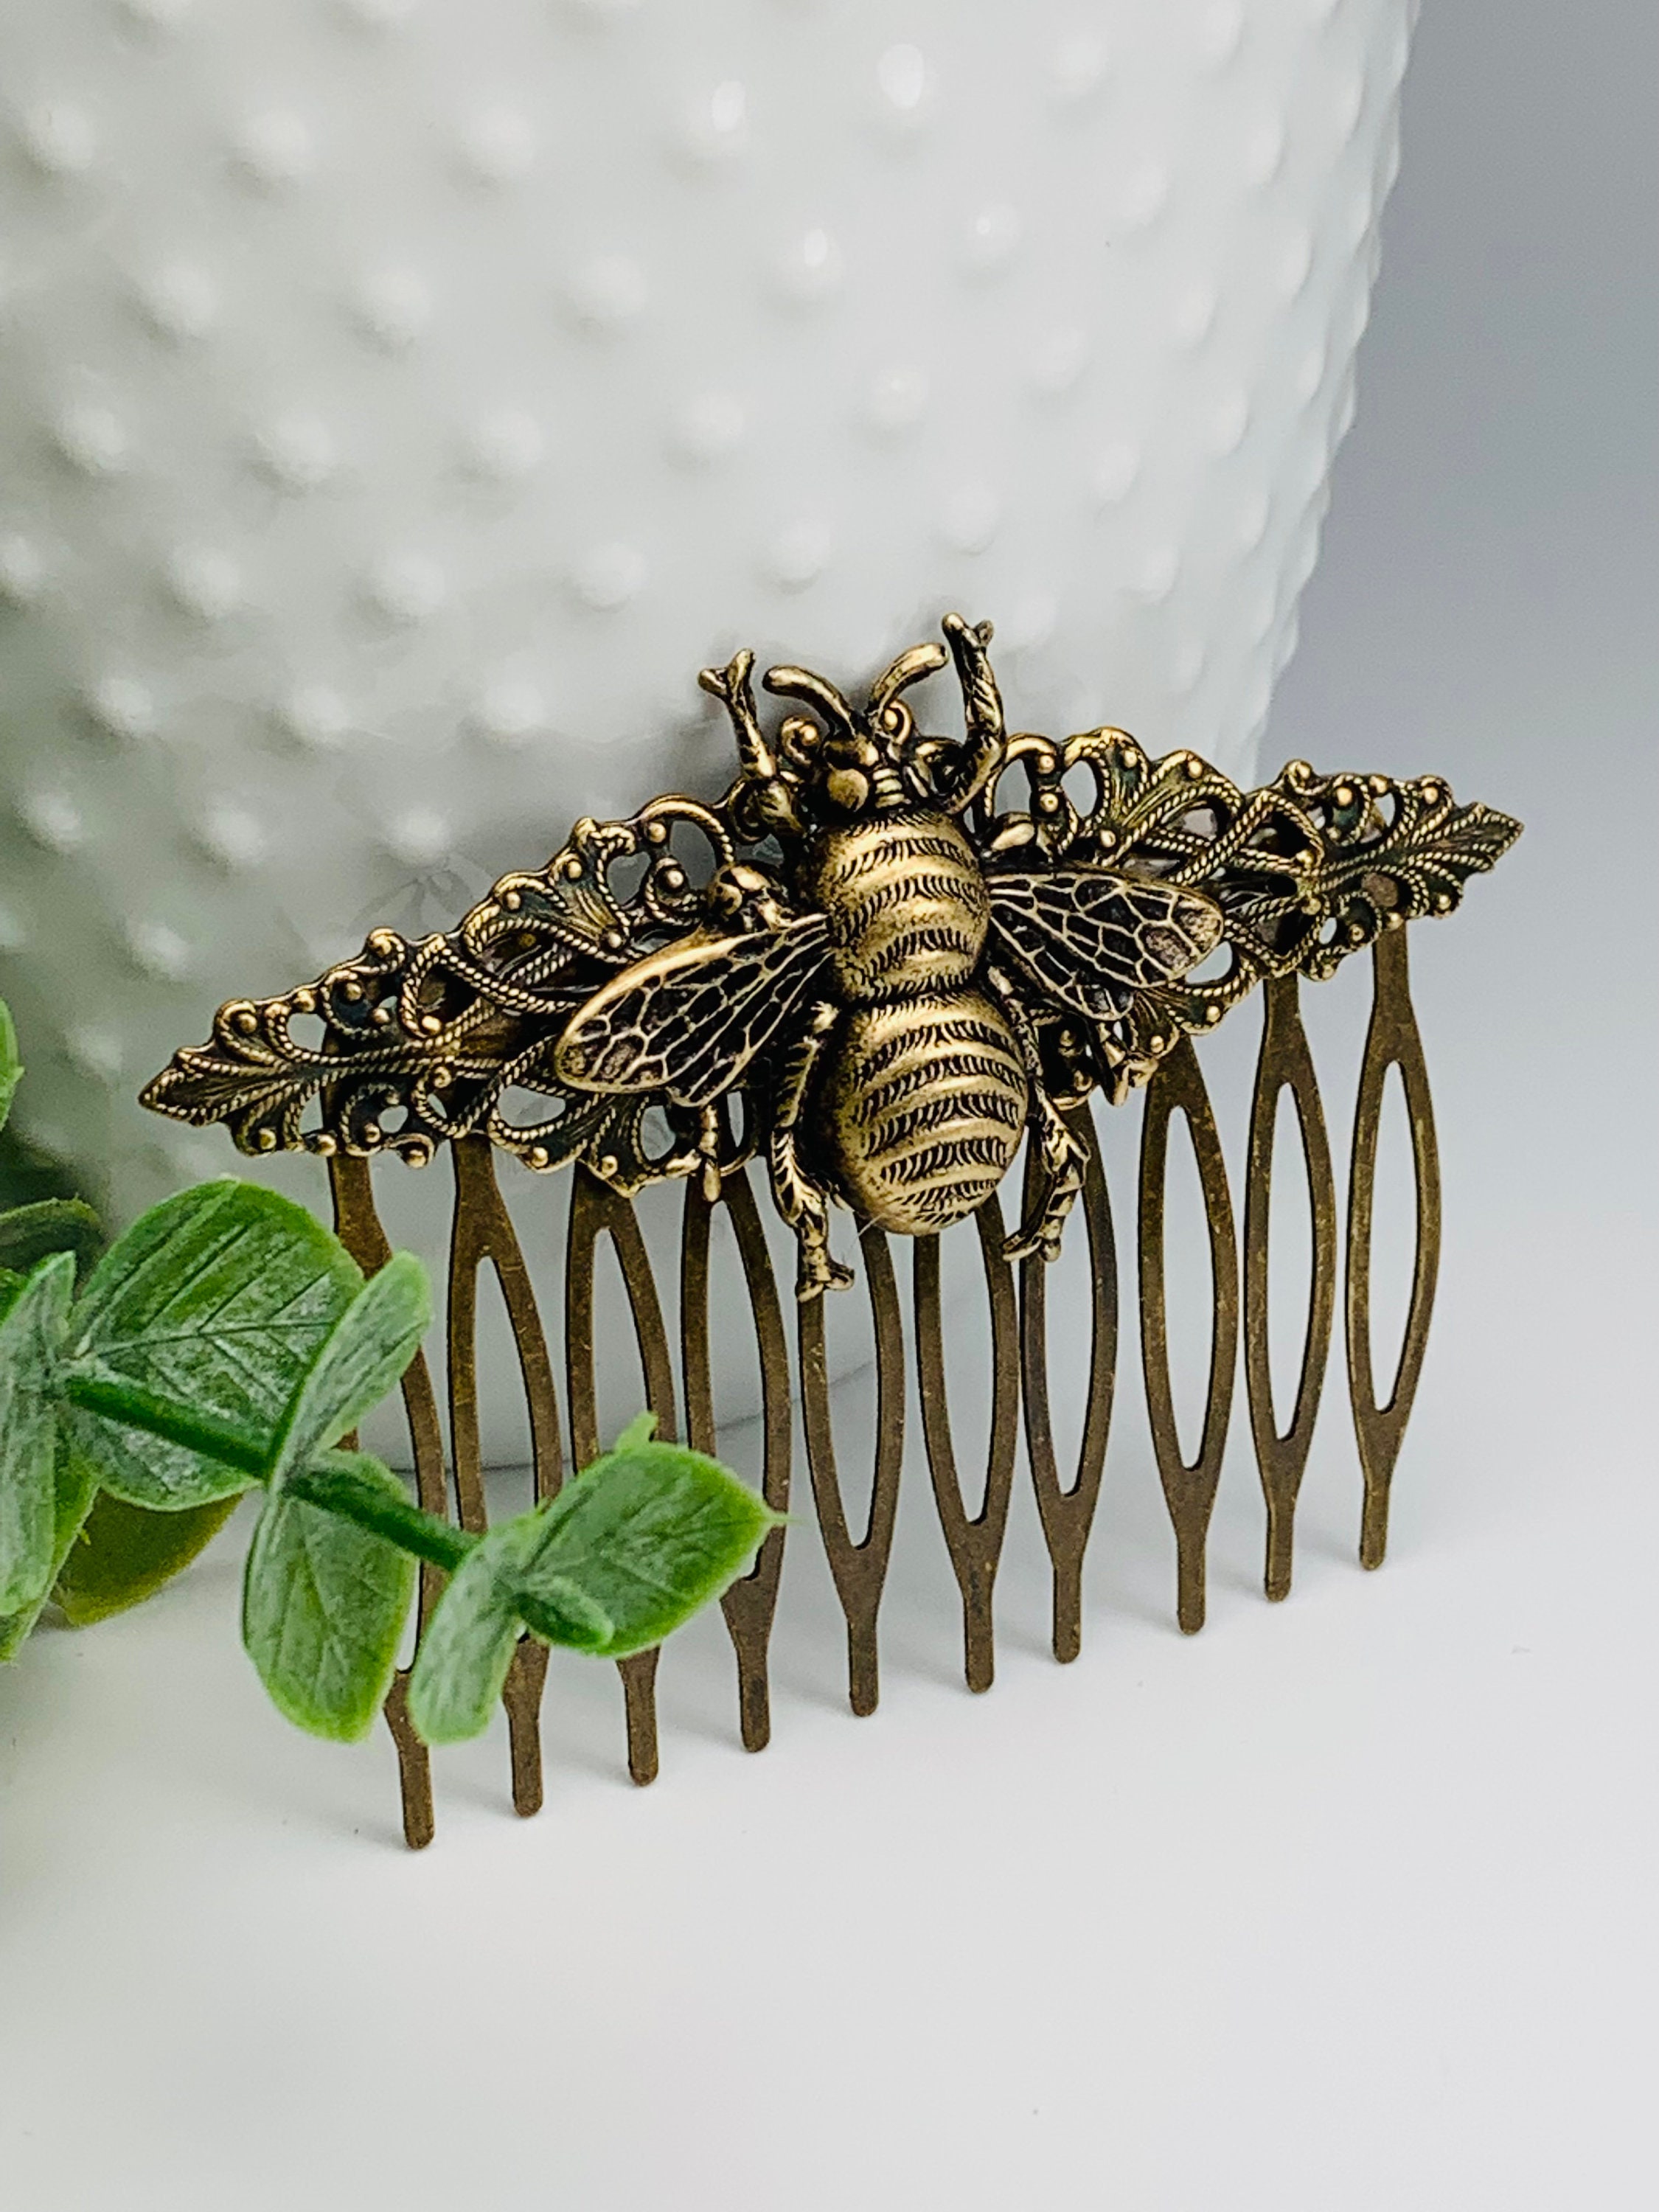 4 Pieces Bee Accessories 2 Pieces Hollow Geometric Bee Honeycomb Hair Clips  and 2 Pieces Bee Hair Pin Clips Dainty Alloy Metal Bee Hair Twist Bun Hair